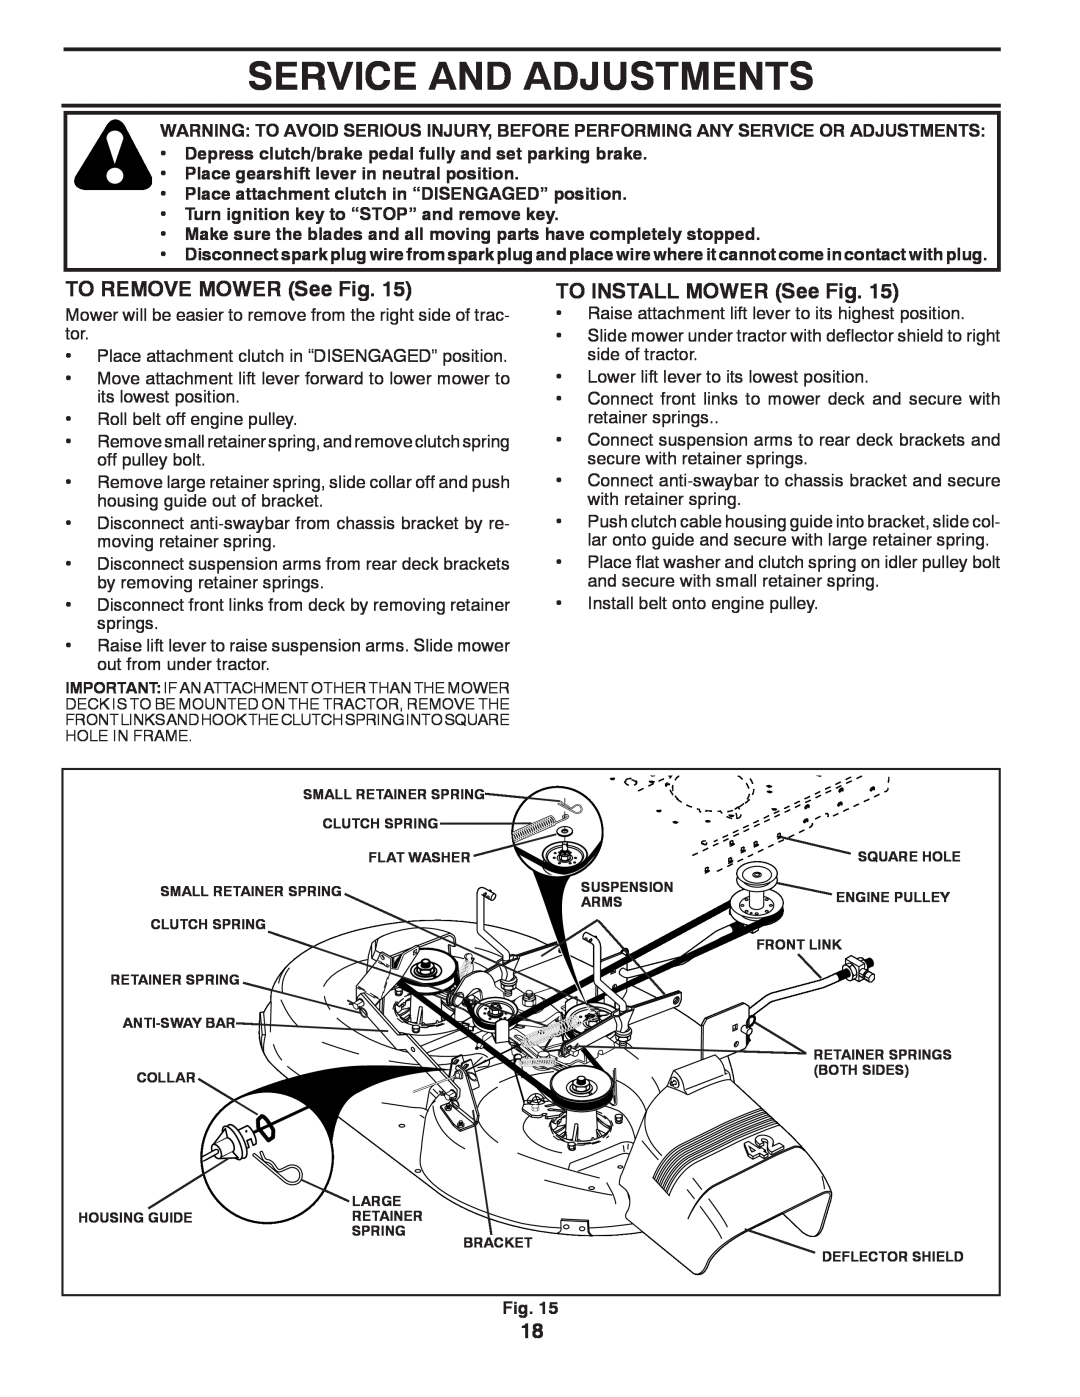 Poulan 438511, PO14542LT, 96012011200 manual Service And Adjustments, TO REMOVE MOWER See Fig, TO INSTALL MOWER See Fig 